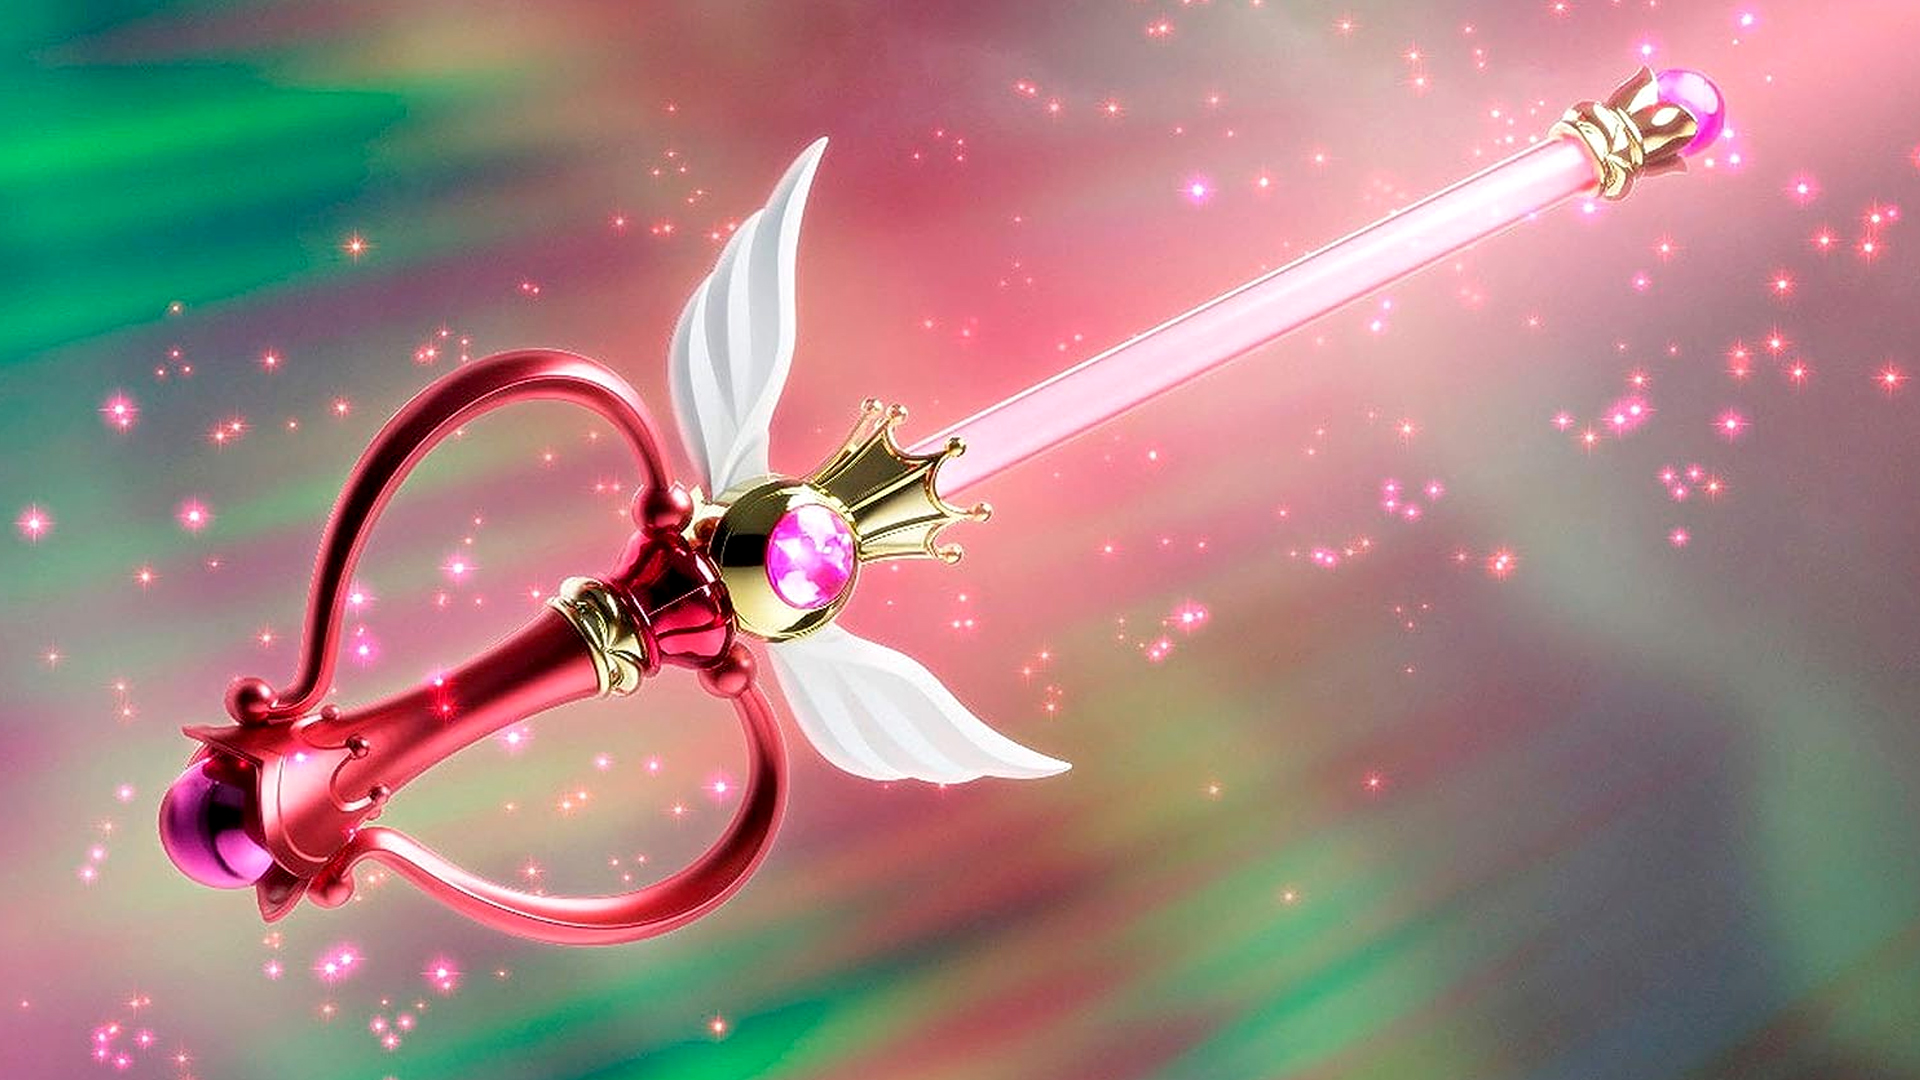 Sailor Moon Moon Kaleidoscope Proplica surrounded by magical pink sparkles.